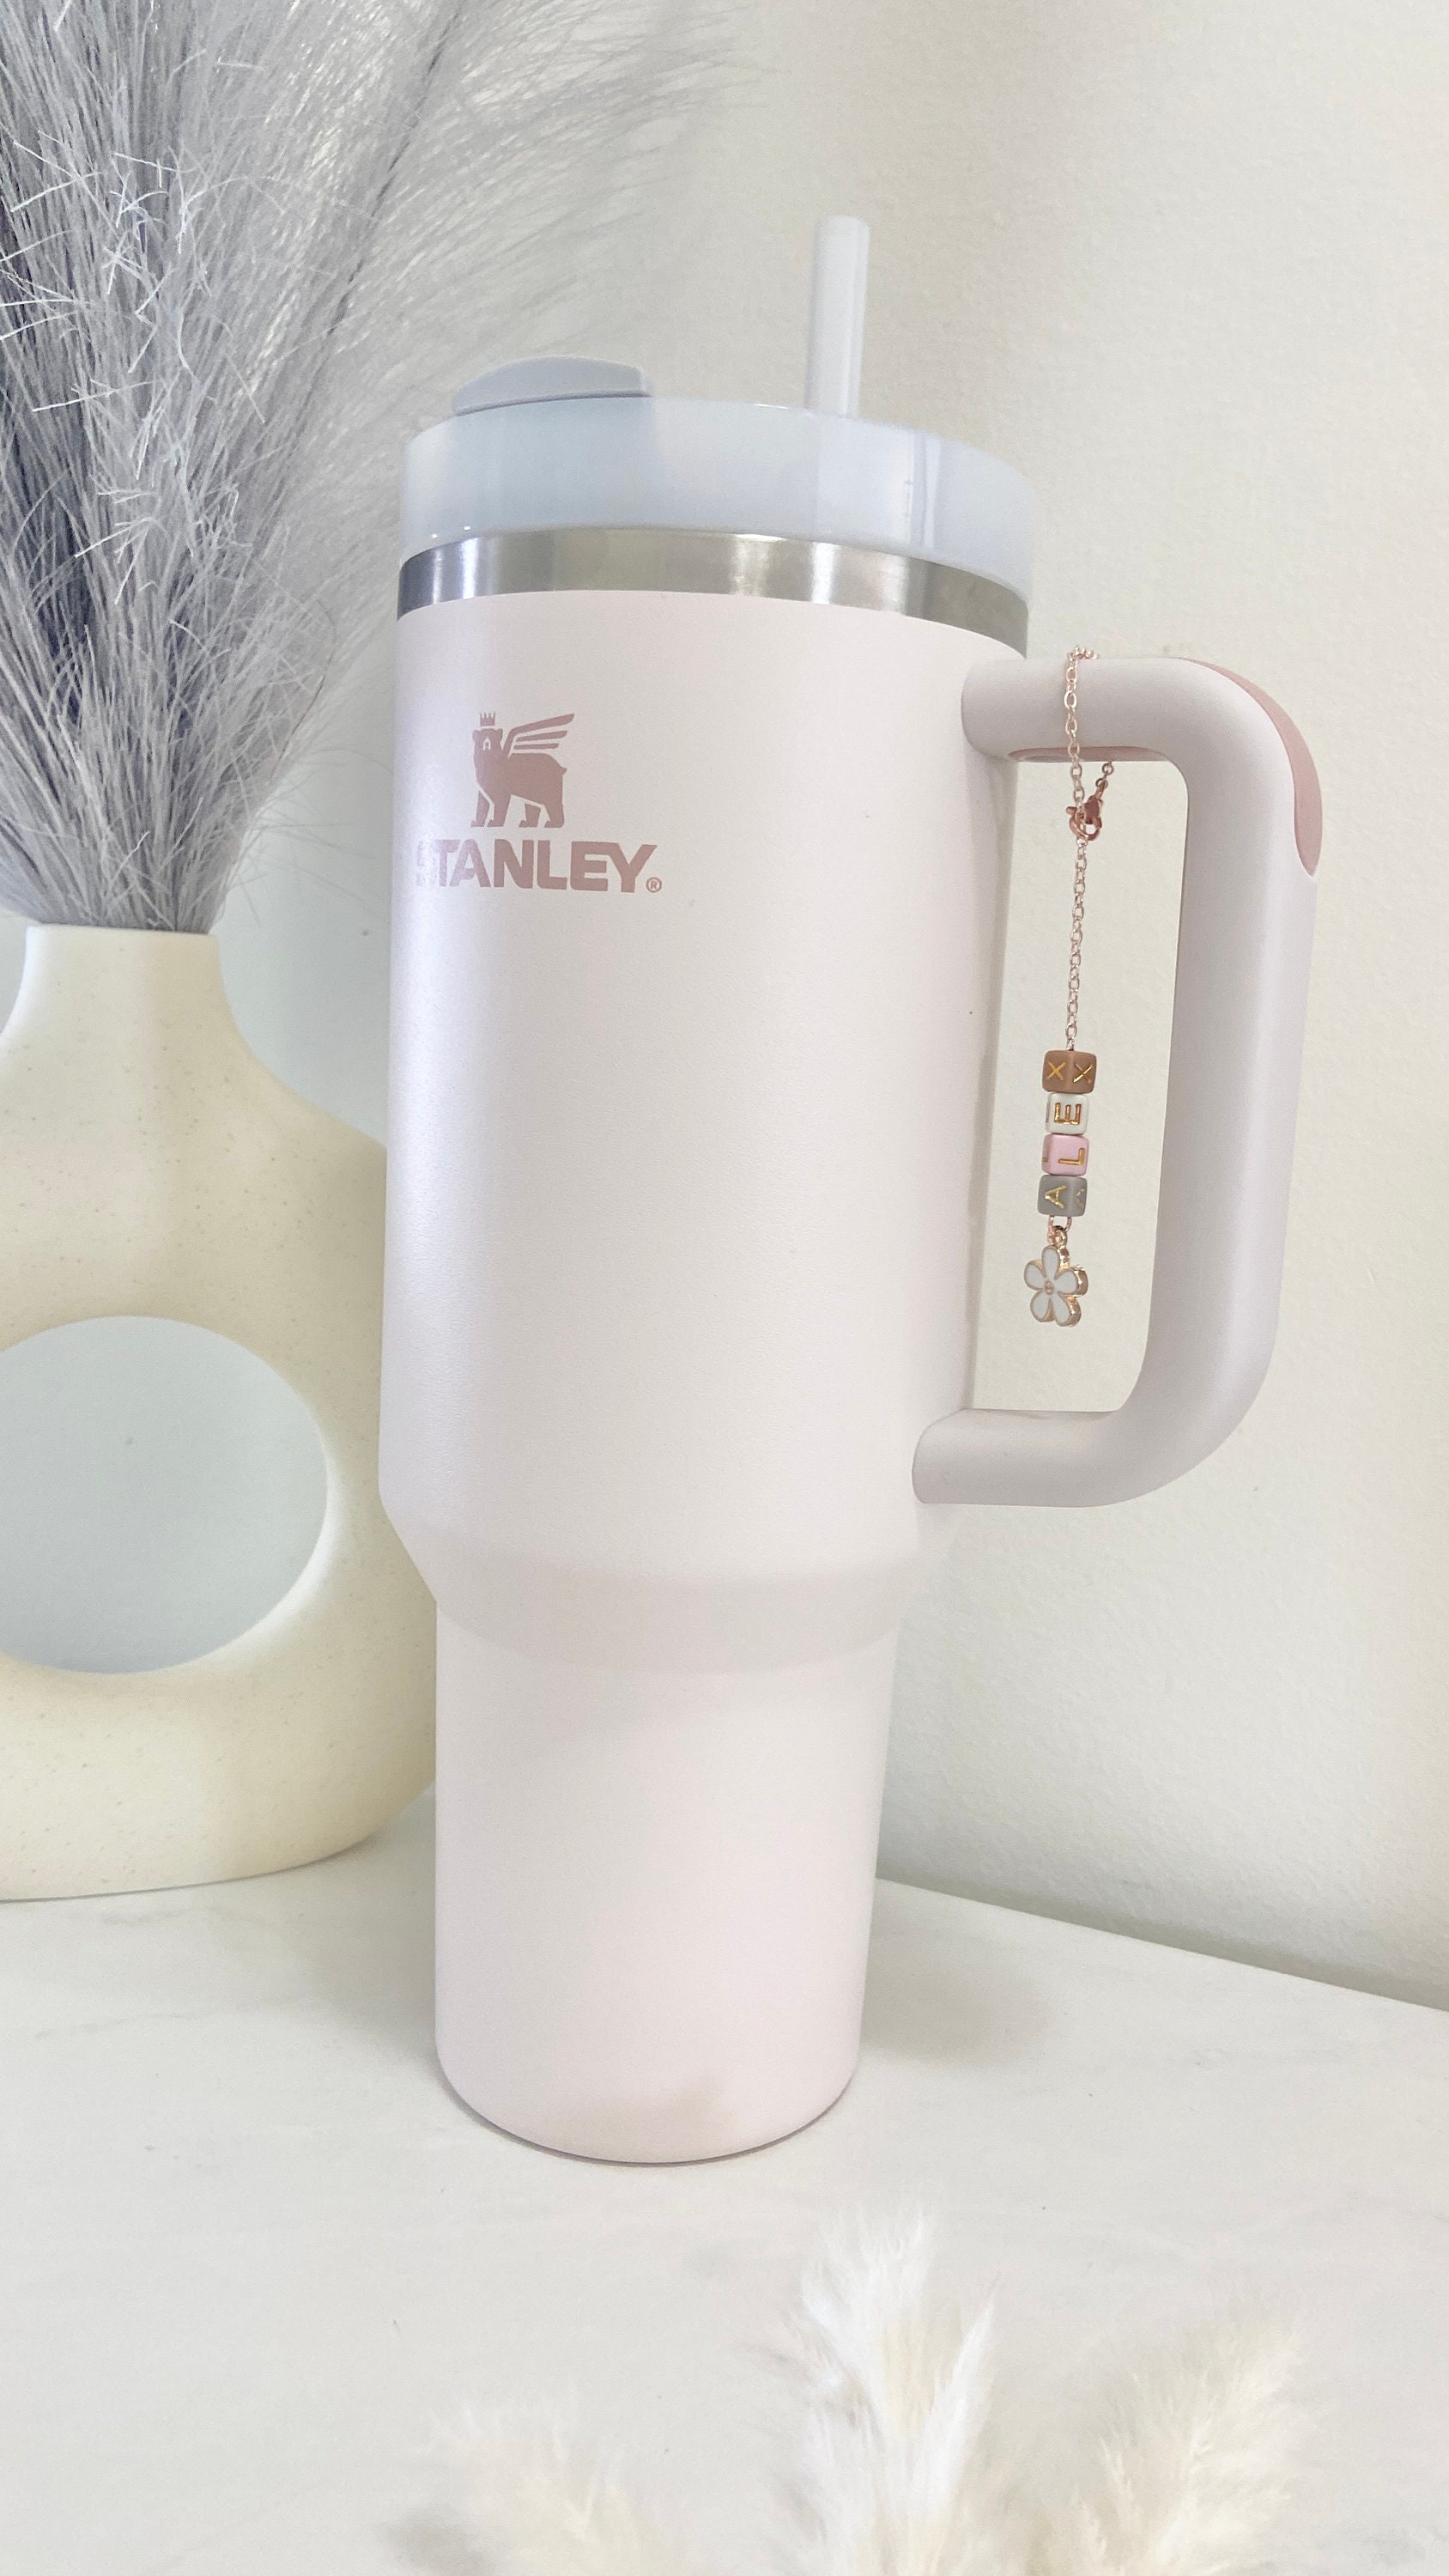 Stanley Tumbler Cup Charm Accessories For Water Bottle Stanley Cup Tumbler Handle  Charm Stanley Accessories Water Bottle Charm Accessories - Stanley Tumbler  - Stylish Stanley Tumbler - Pink Barbie Citron Dye Tie